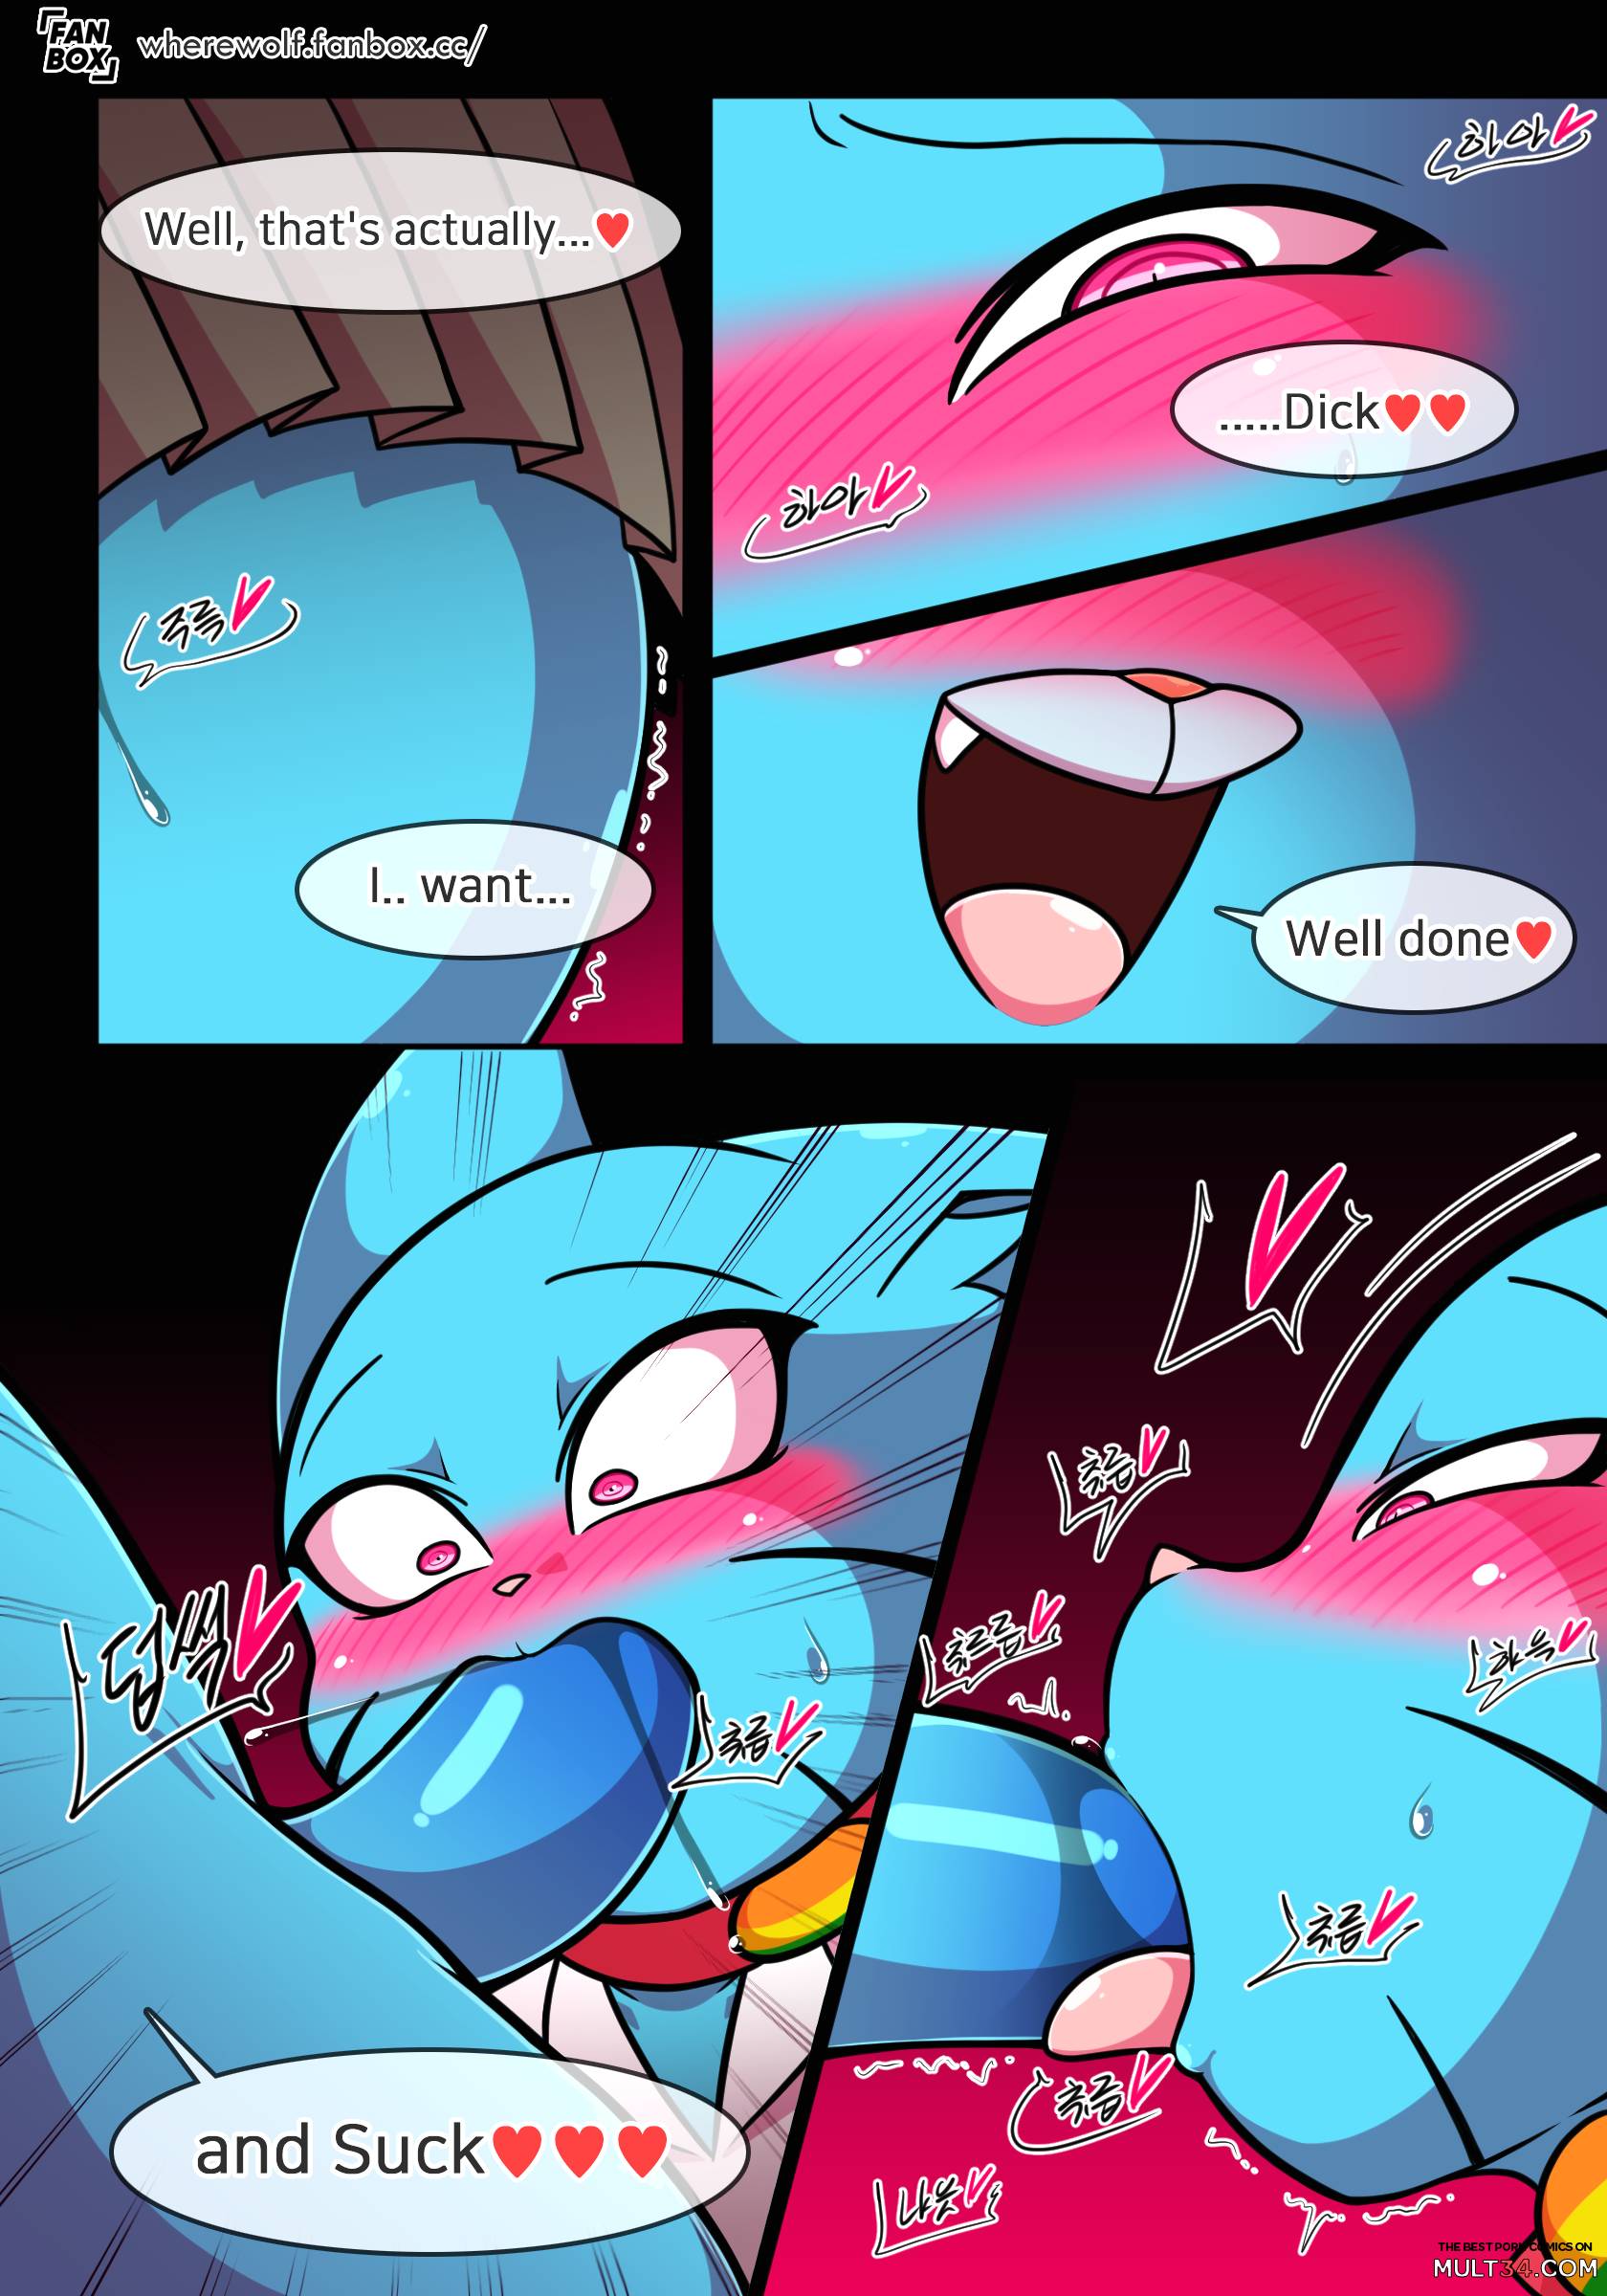 Lusty World of Nicole 7 - Tuesday page 16